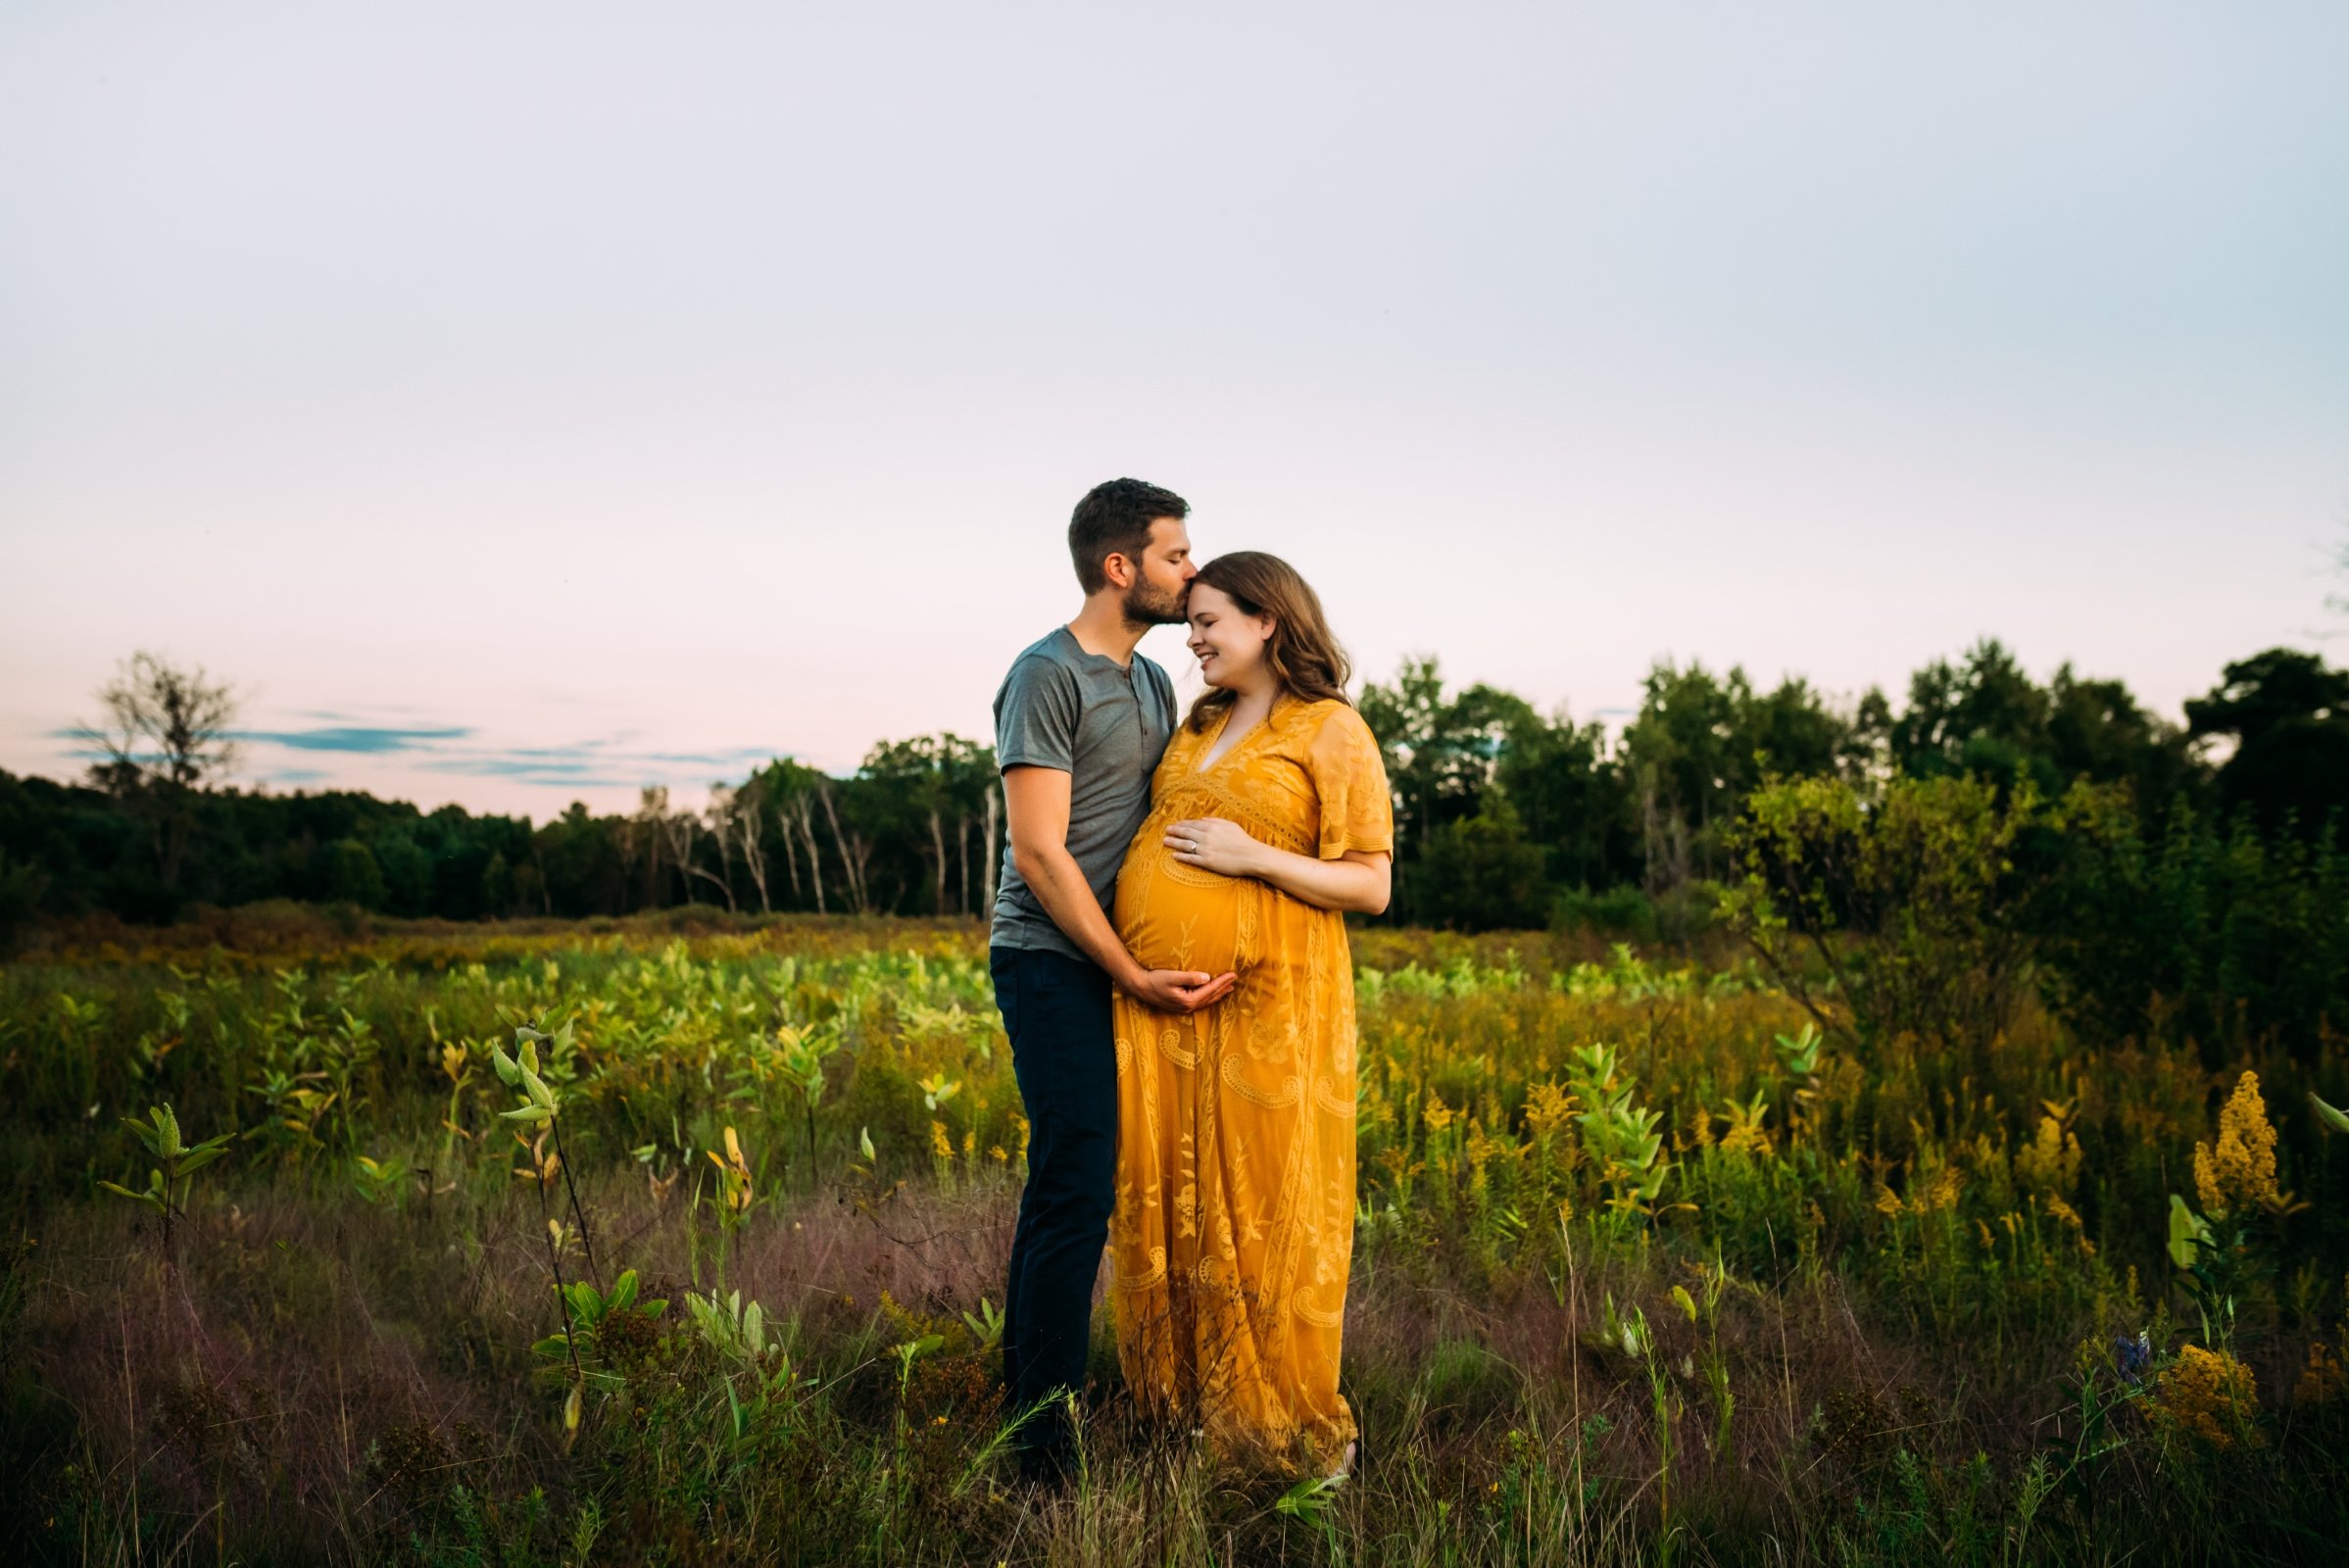 husband embraces pregnant belly in wausau wisconson field